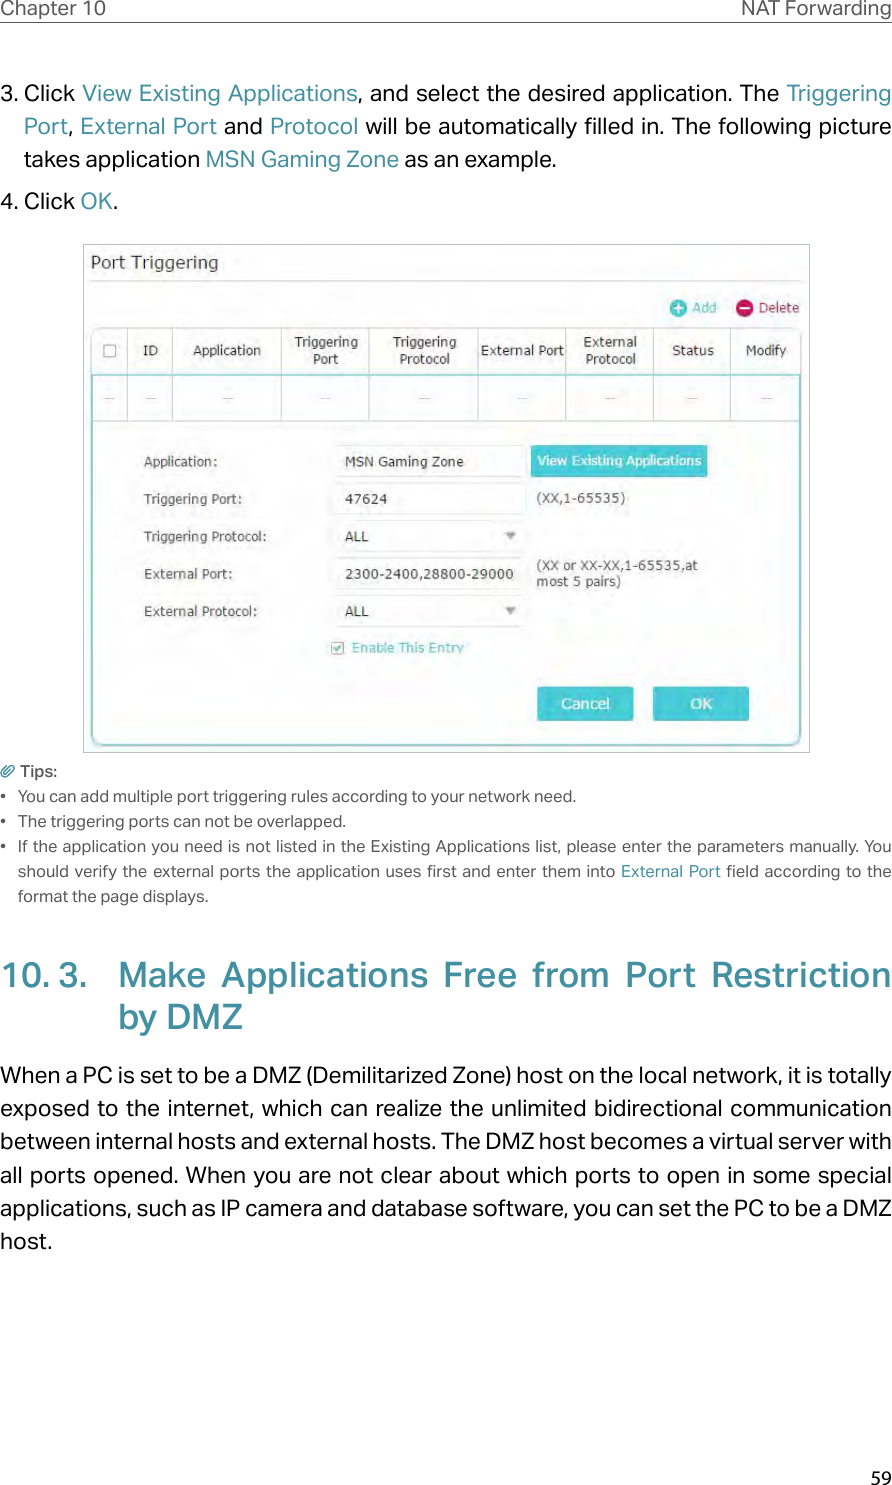 59Chapter 10 NAT Forwarding3. Click View Existing Applications, and select the desired application. The Triggering Port, External Port and Protocol will be automatically filled in. The following picture takes application MSN Gaming Zone as an example.4. Click OK.Tips:•  You can add multiple port triggering rules according to your network need.•  The triggering ports can not be overlapped.•  If the application you need is not listed in the Existing Applications list, please enter the parameters manually. You should verify the external ports the application uses first and enter them into External Port field according to the format the page displays.10. 3.  Make Applications Free from Port Restriction by DMZWhen a PC is set to be a DMZ (Demilitarized Zone) host on the local network, it is totally exposed to the internet, which can realize the unlimited bidirectional communication between internal hosts and external hosts. The DMZ host becomes a virtual server with all ports opened. When you are not clear about which ports to open in some special applications, such as IP camera and database software, you can set the PC to be a DMZ host.